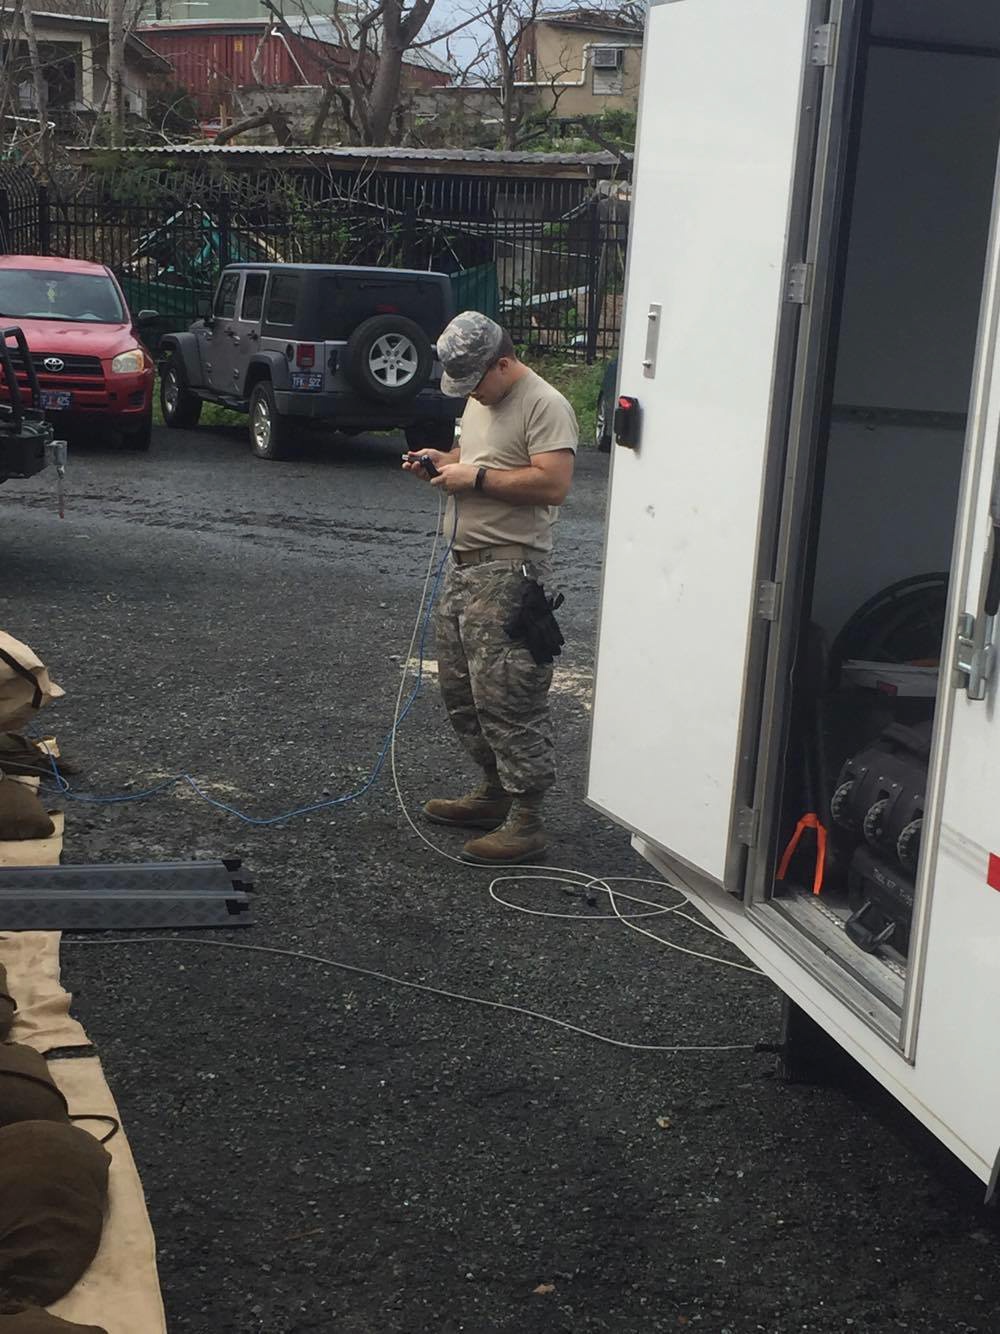 Tech. Sgt. Michael Miller, part of a six-member team from the 269th Combat Communications Squadron, Springfield Ohio Air National Guard Base, prepares satcom cables to restore communications for first responders in the aftermath of Hurricaine Maria in St.